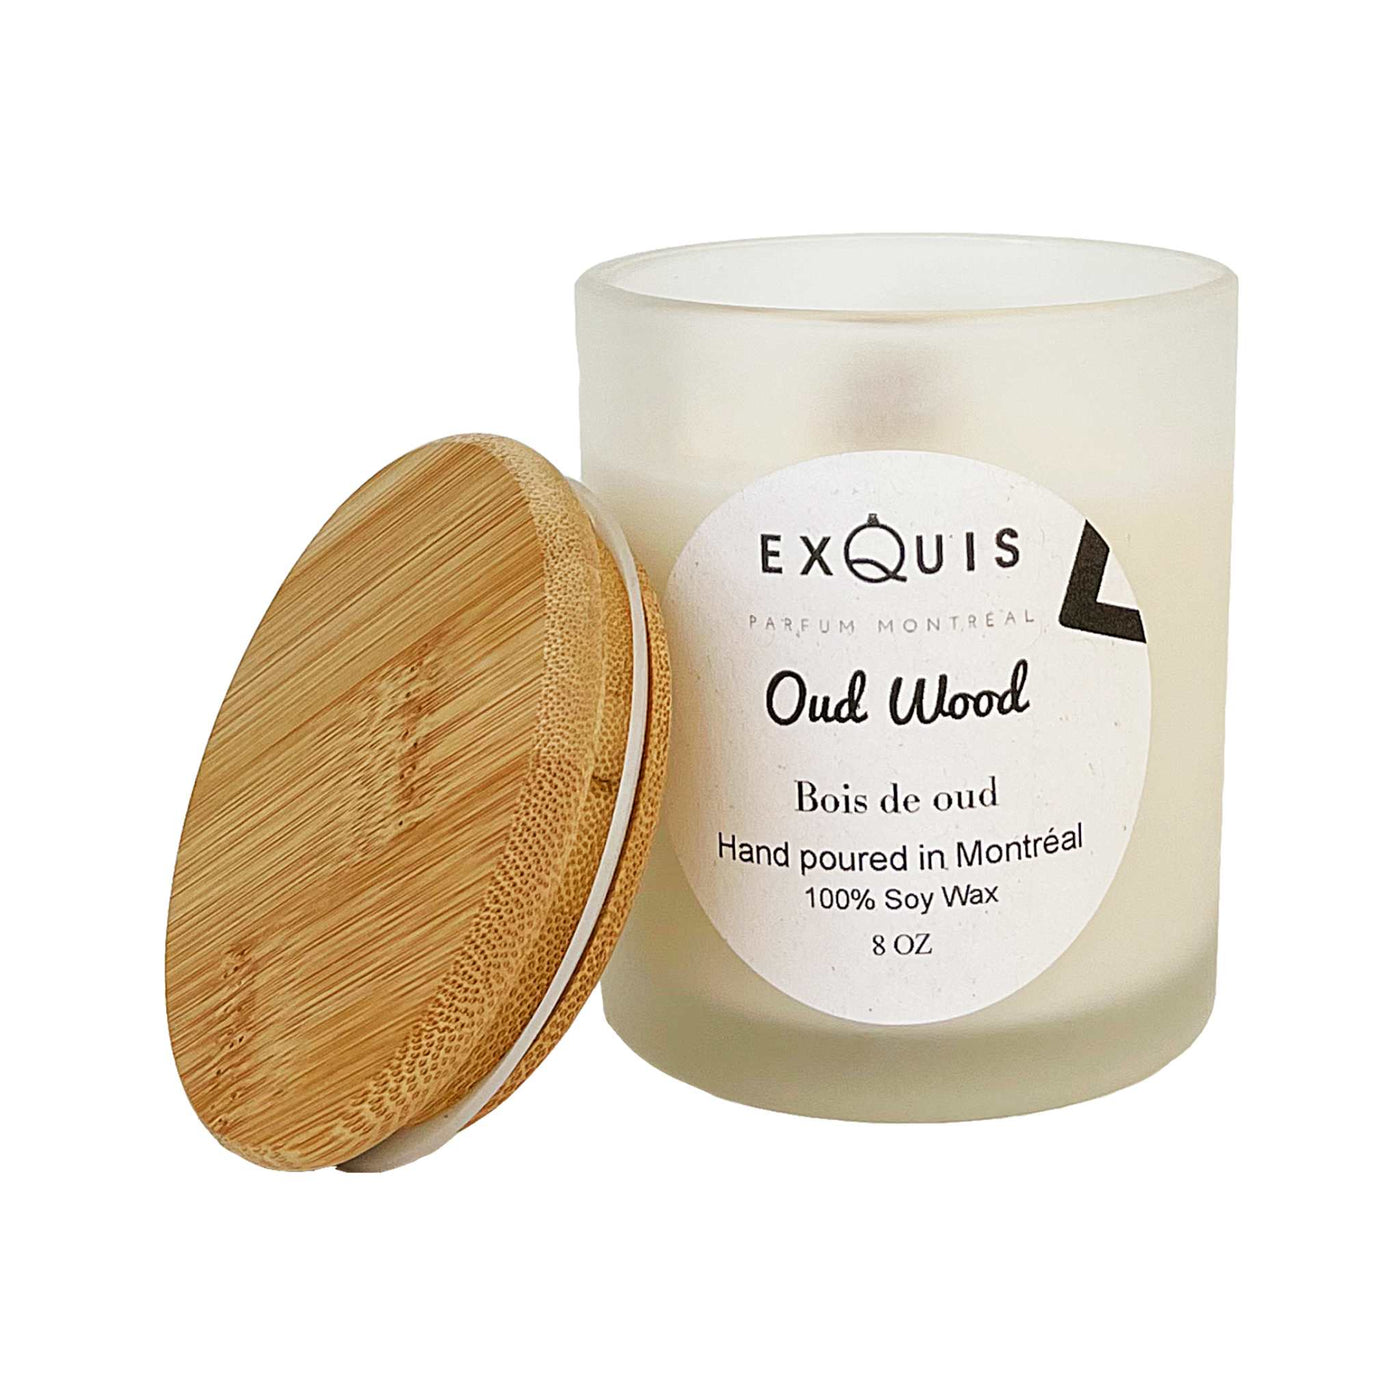 oud wood candle parfum exquis